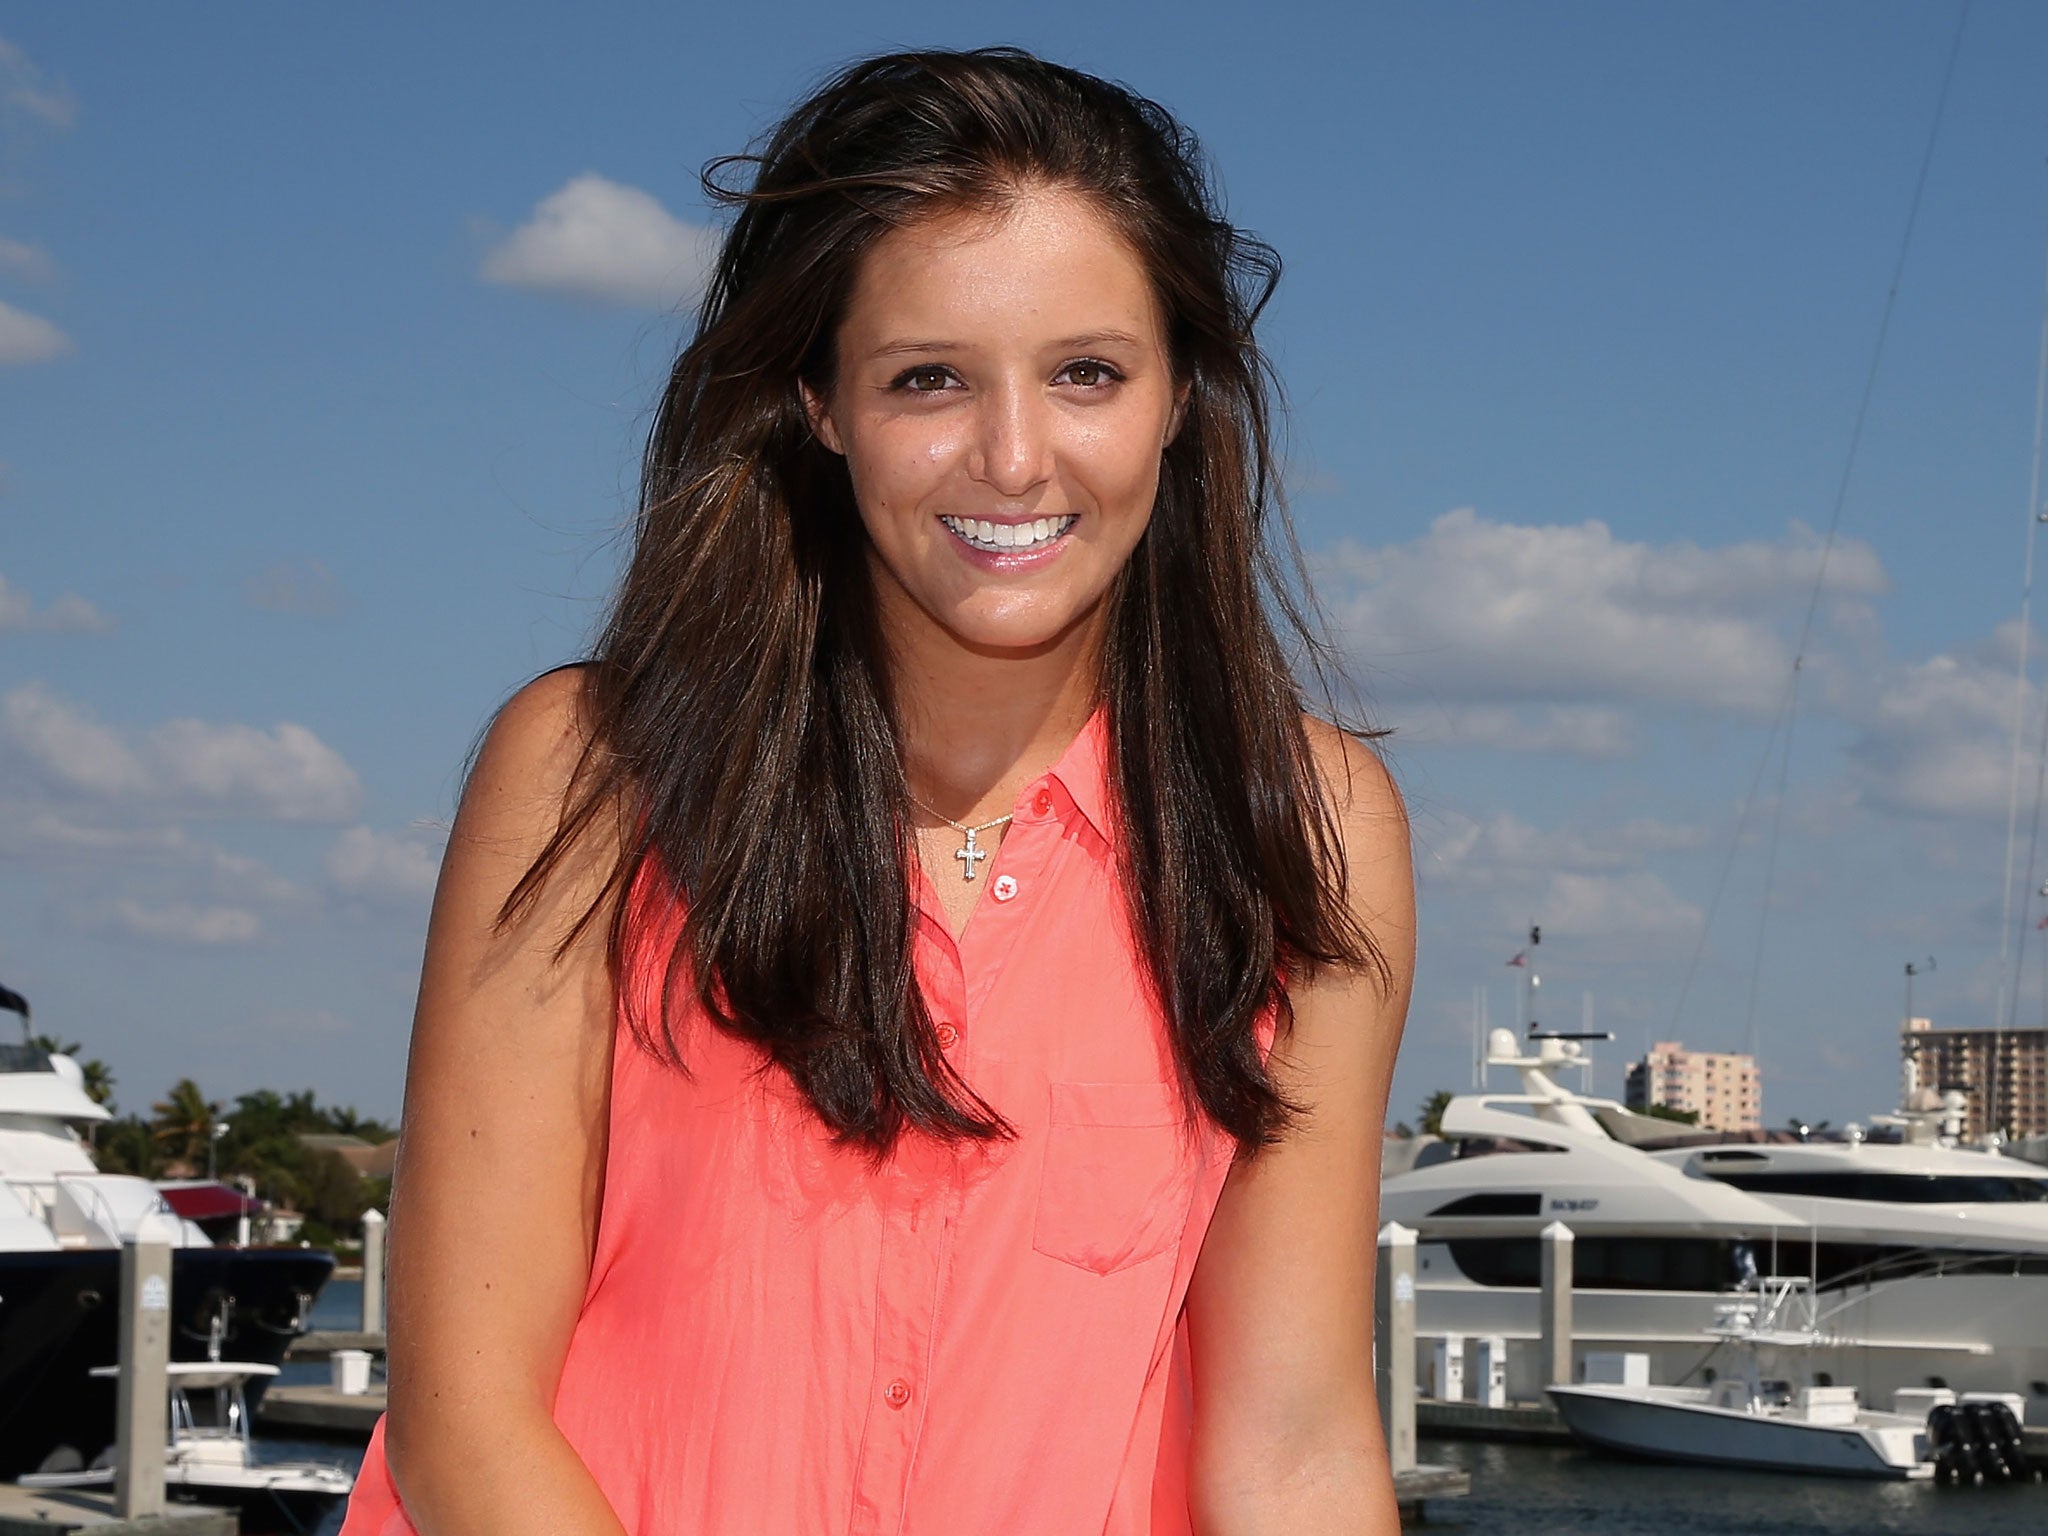 Laura Robson could see a staggering boost in earnings off the court